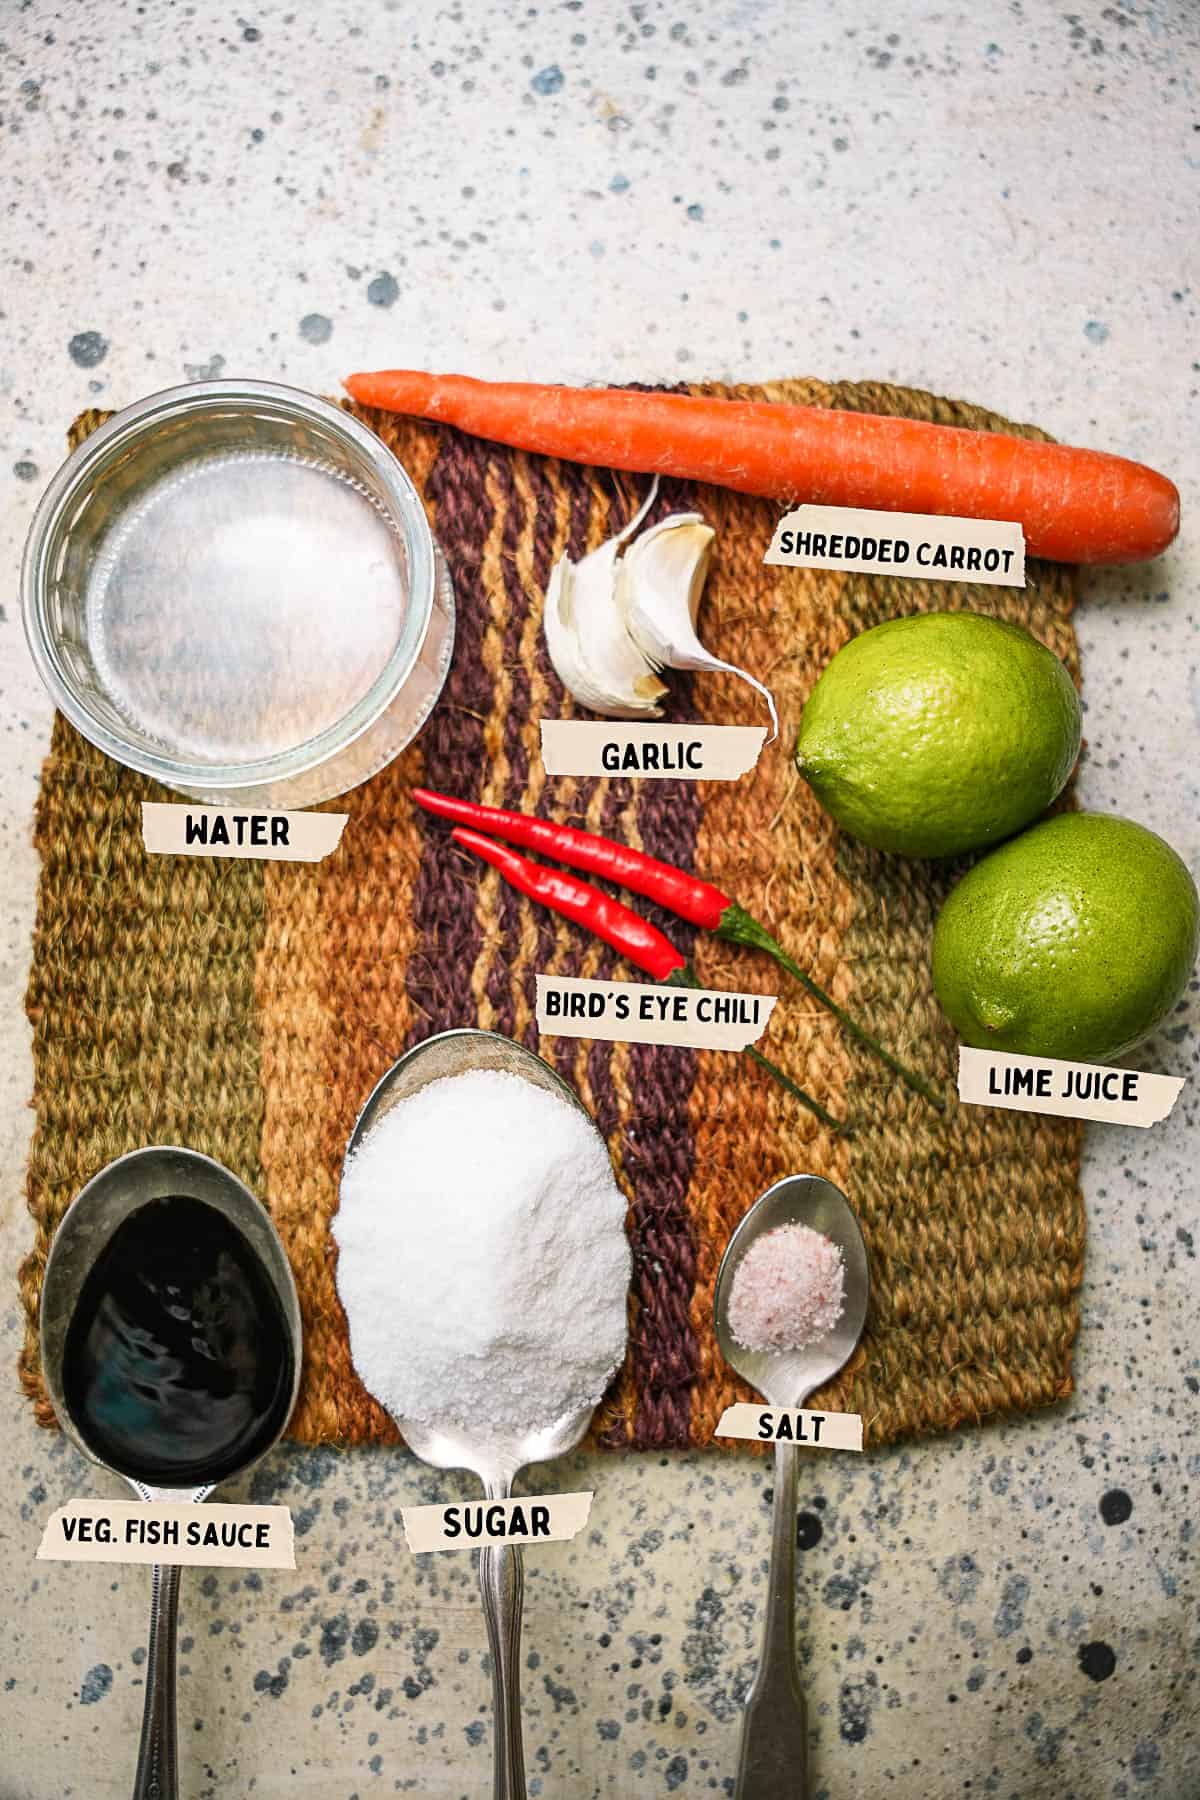 Ingredients for nuoc mam are laid on and labeled on a woven mat.